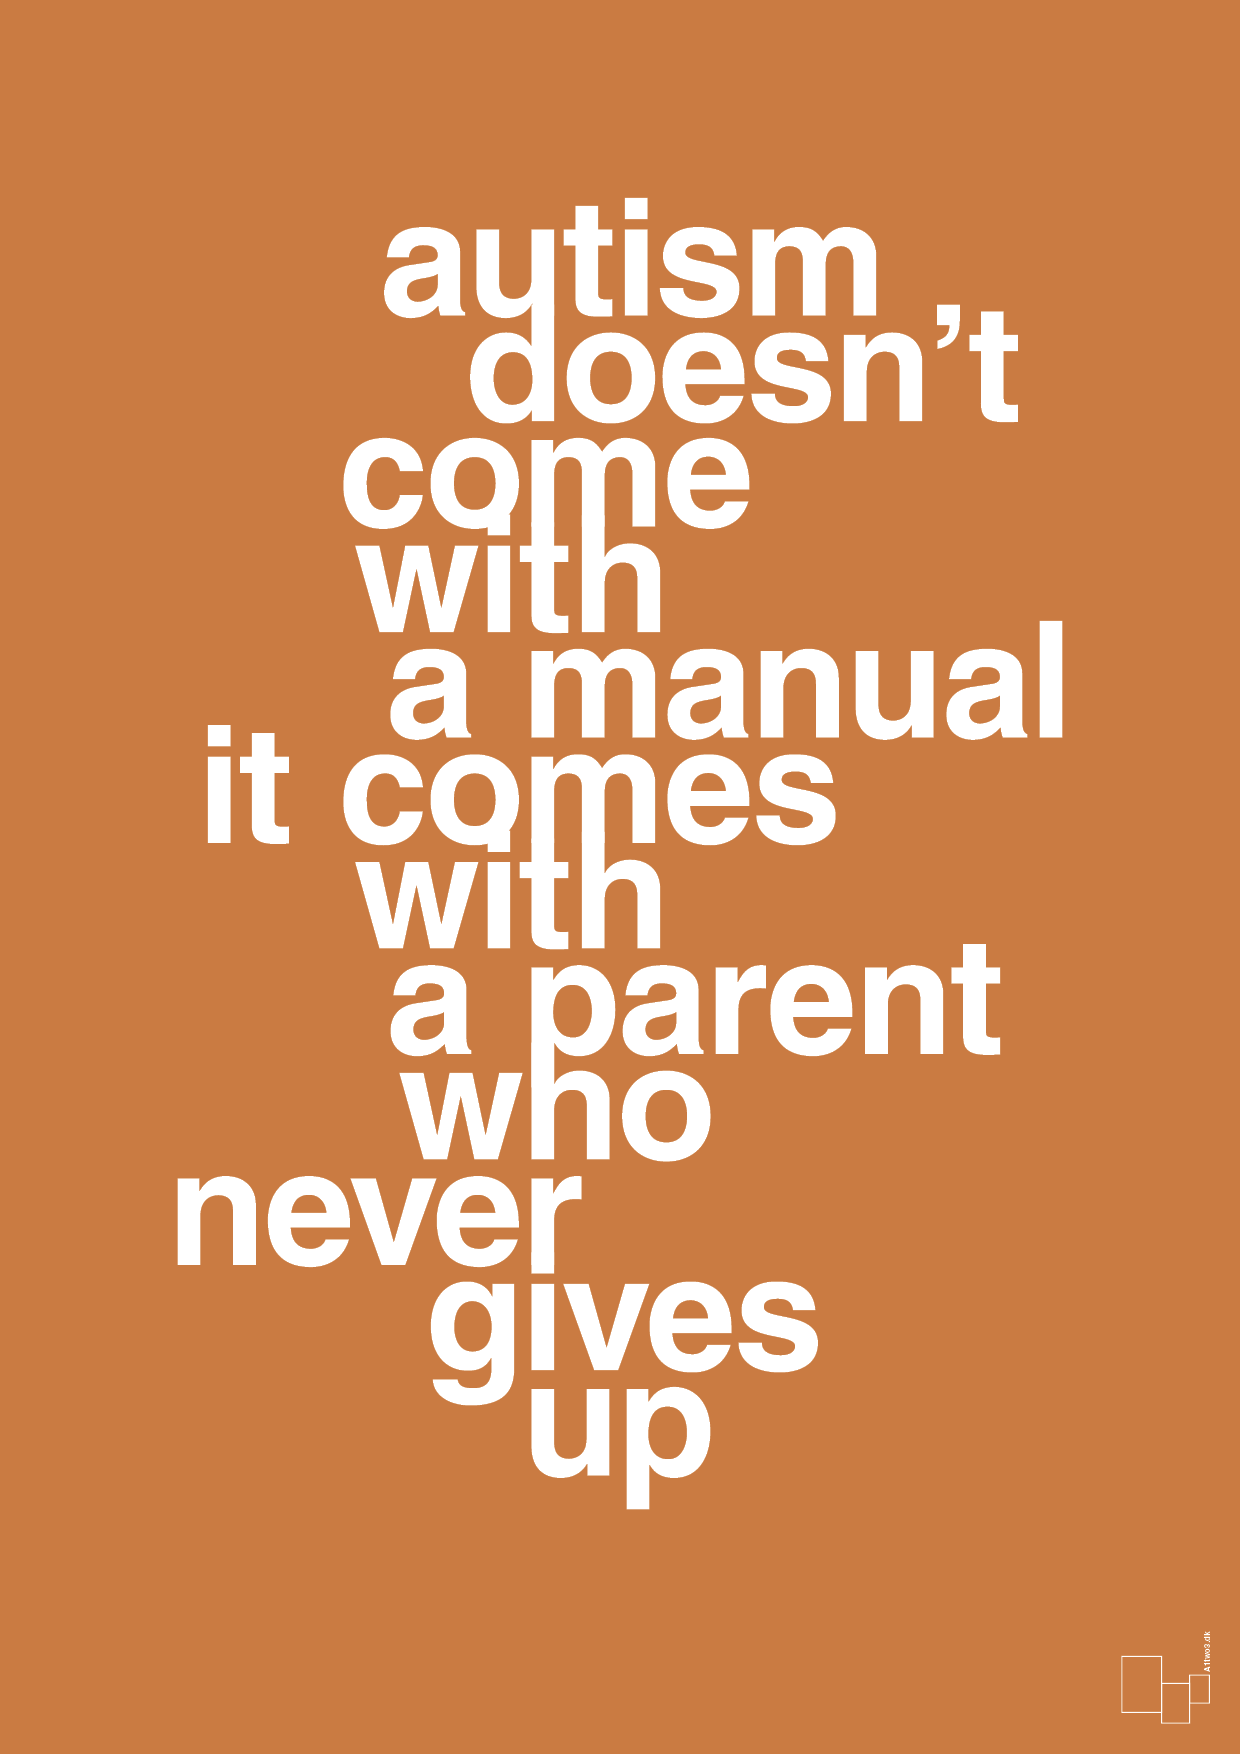 autism doesnt come with a manual it comes with a parent who never gives up - Plakat med Samfund i Rumba Orange